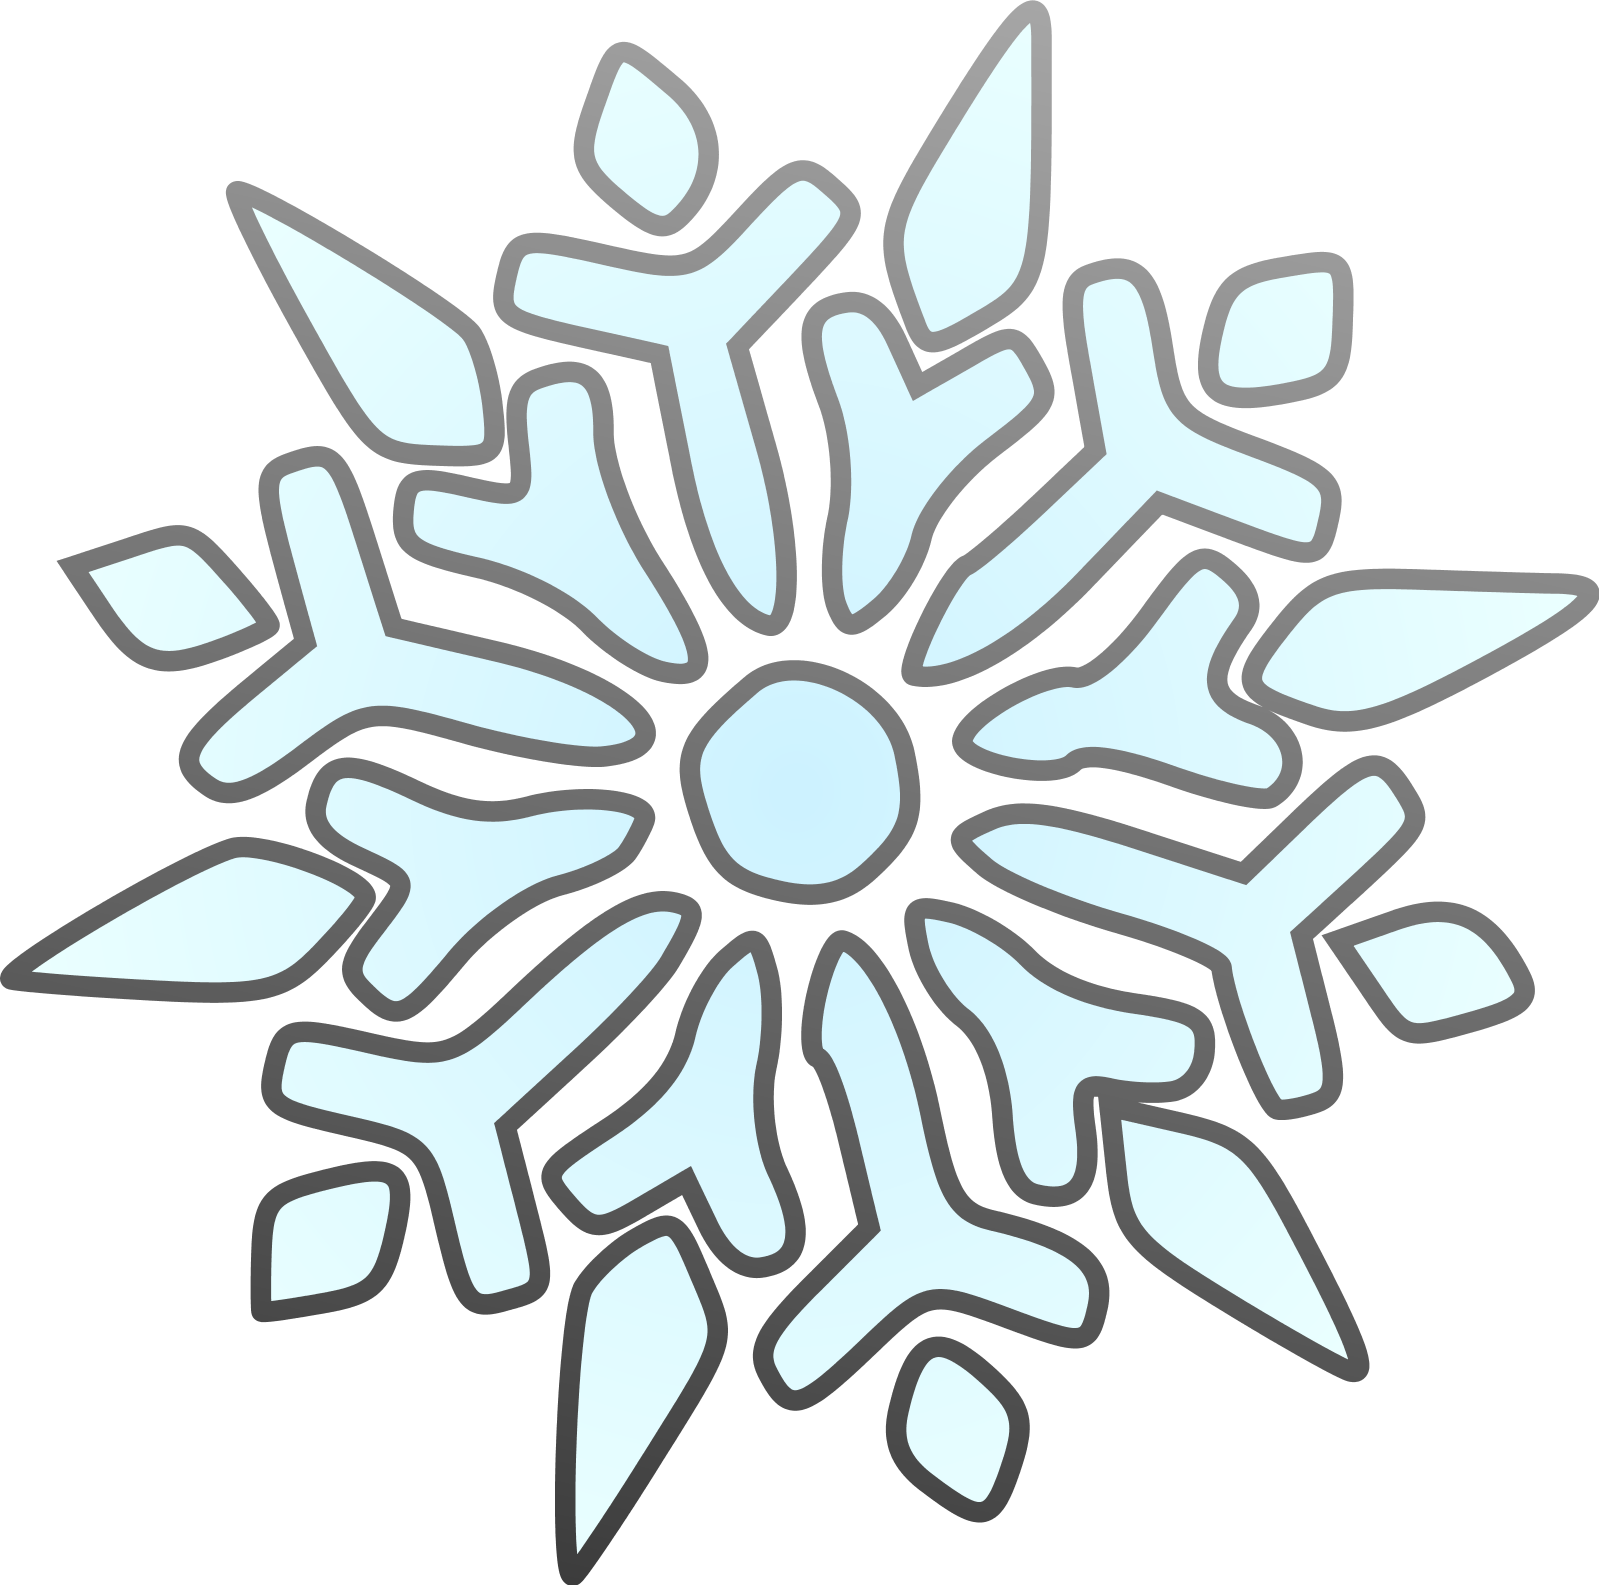 Snowflake Image Clipart